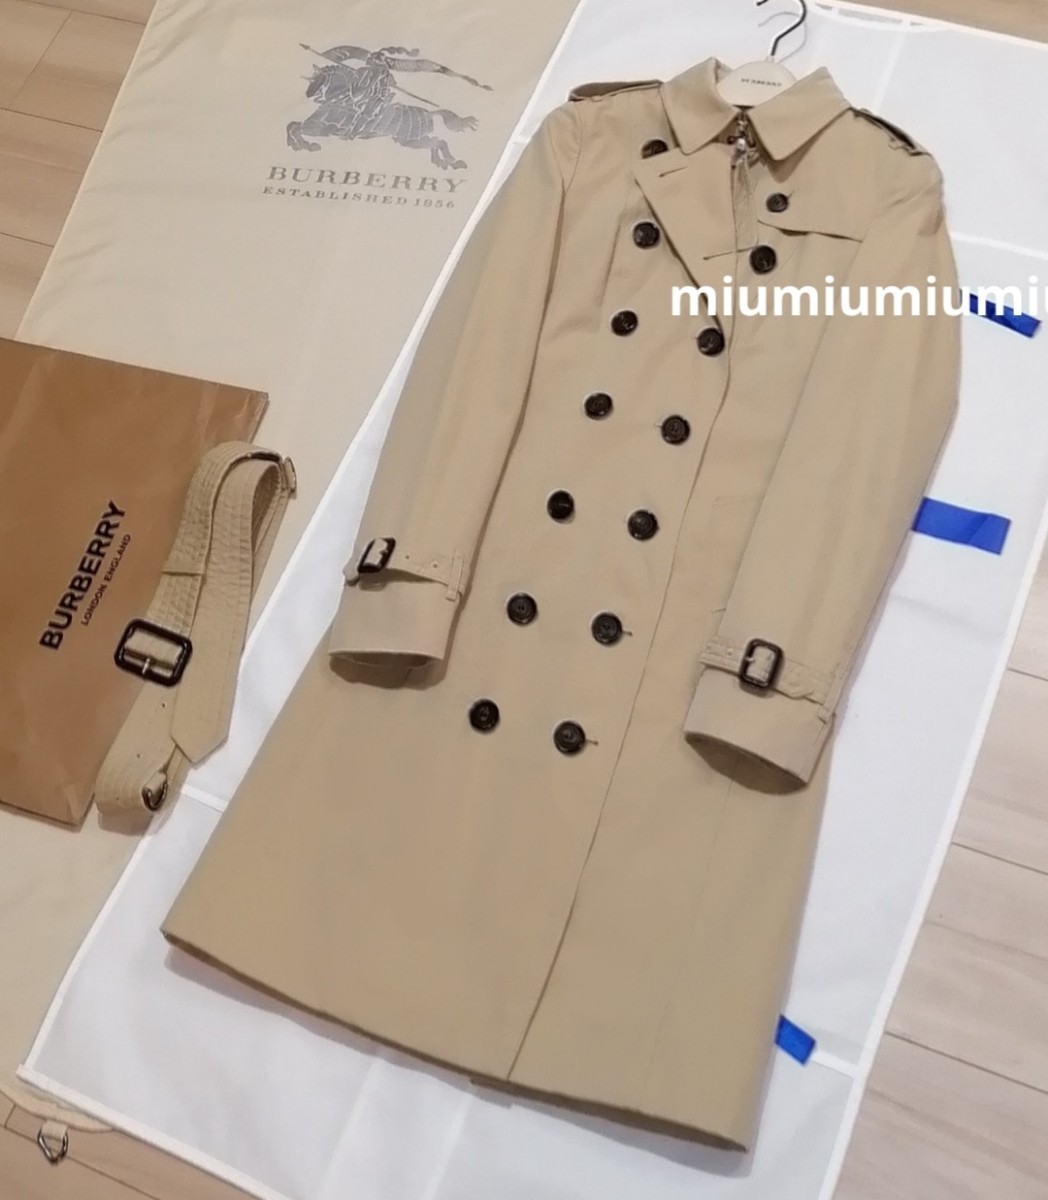  final price. * genuine article fine quality * Burberry BURBERRY trench coat beige outer long belt worn te-ji current model wonderful .XS S